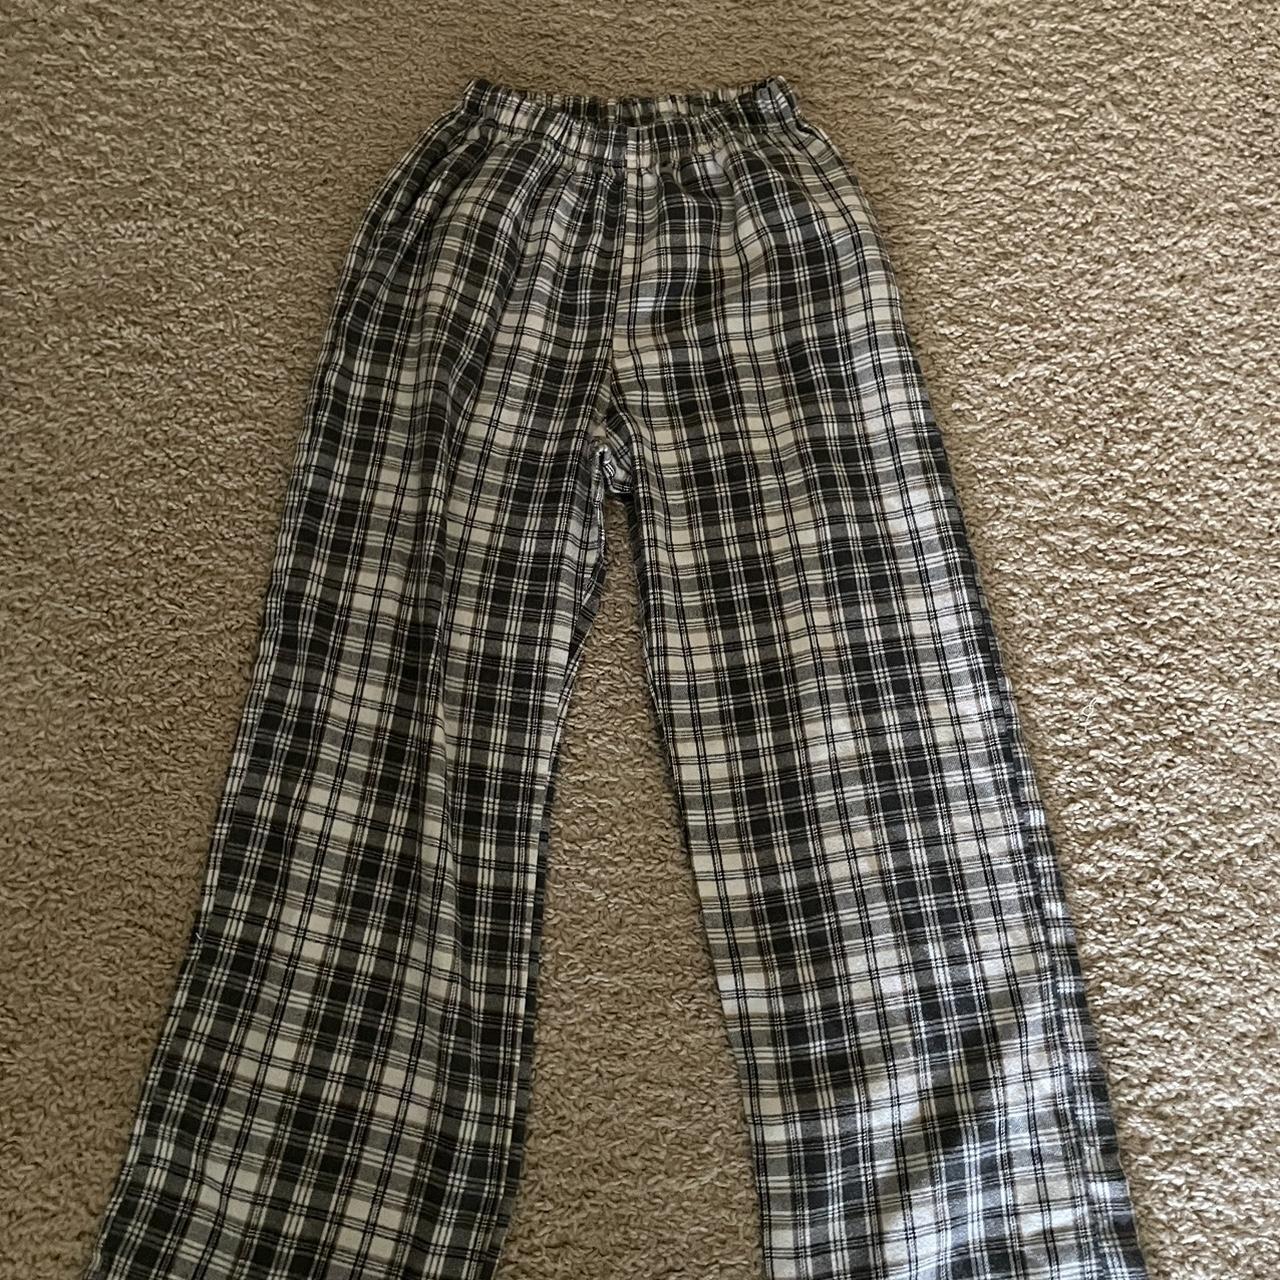 Small pj pants from SHEIN. They didn’t fit - Depop